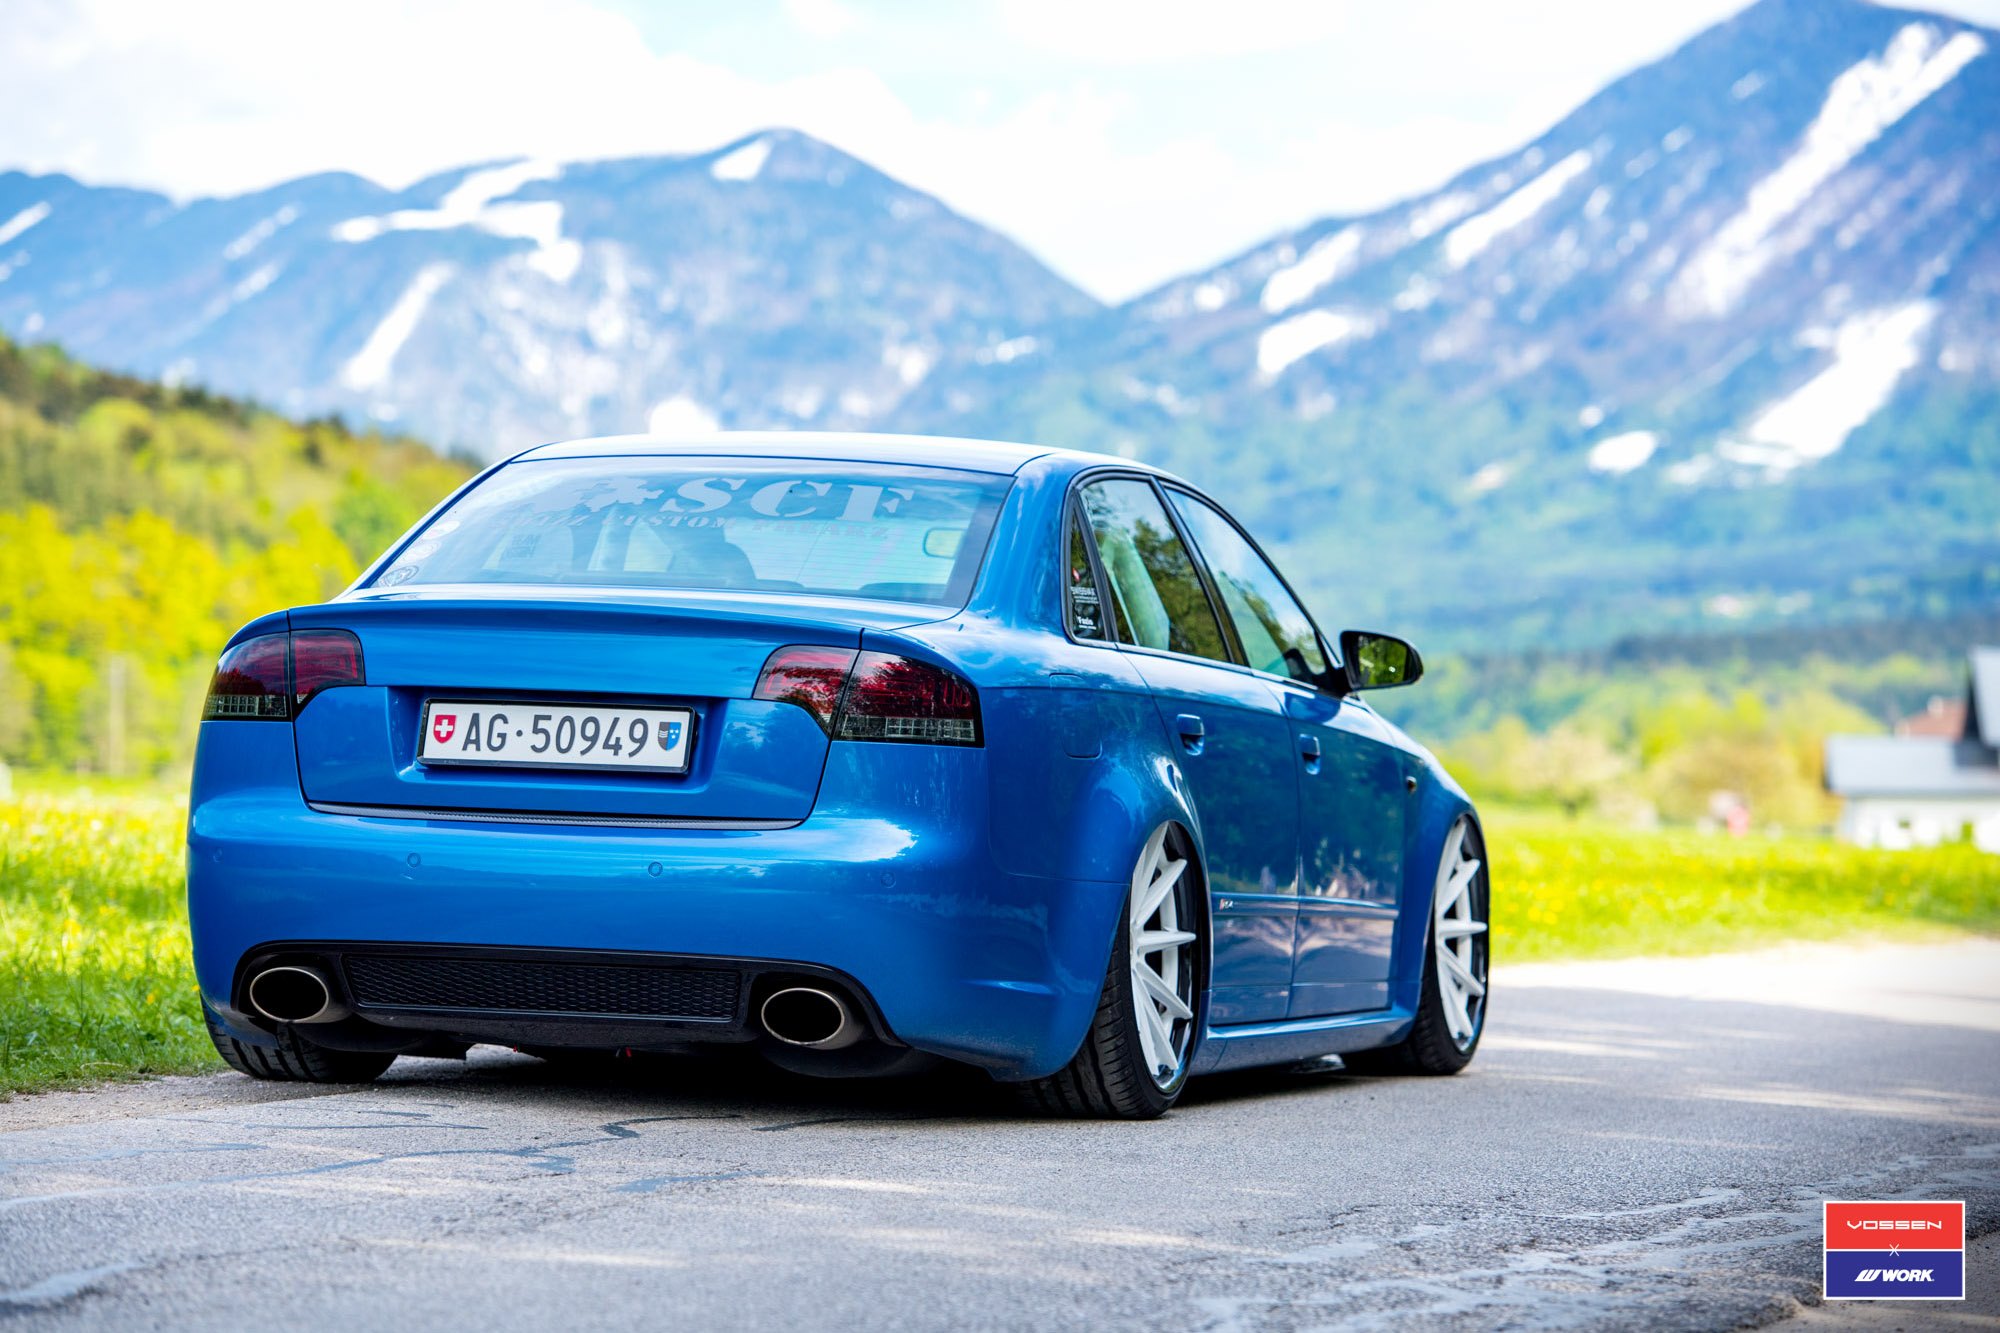 Aftermarket Rear Diffuser with Single Exhaust Tips on Audi S4 - Photo by Vossen